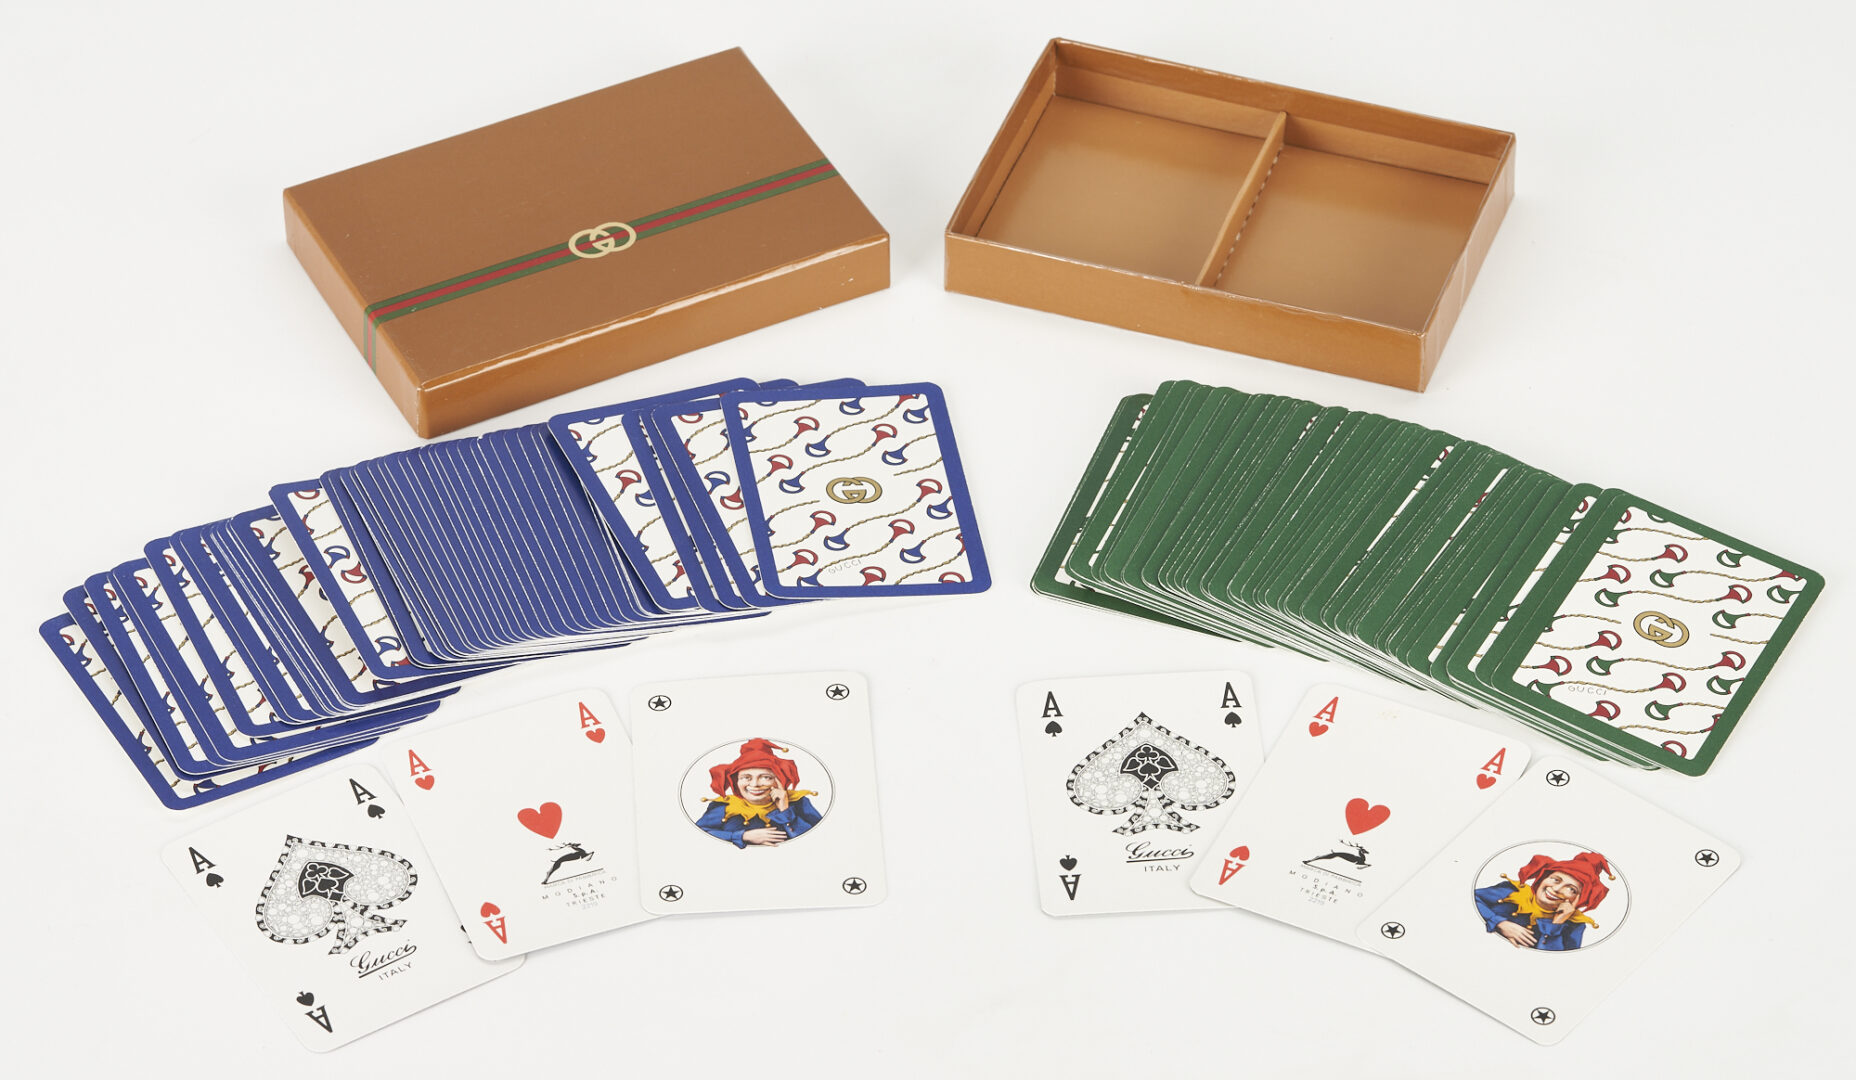 Lot 94: 2 Designer Vintage Playing Card Boxed Sets, Hermes by A.M. Cassandre & Gucci